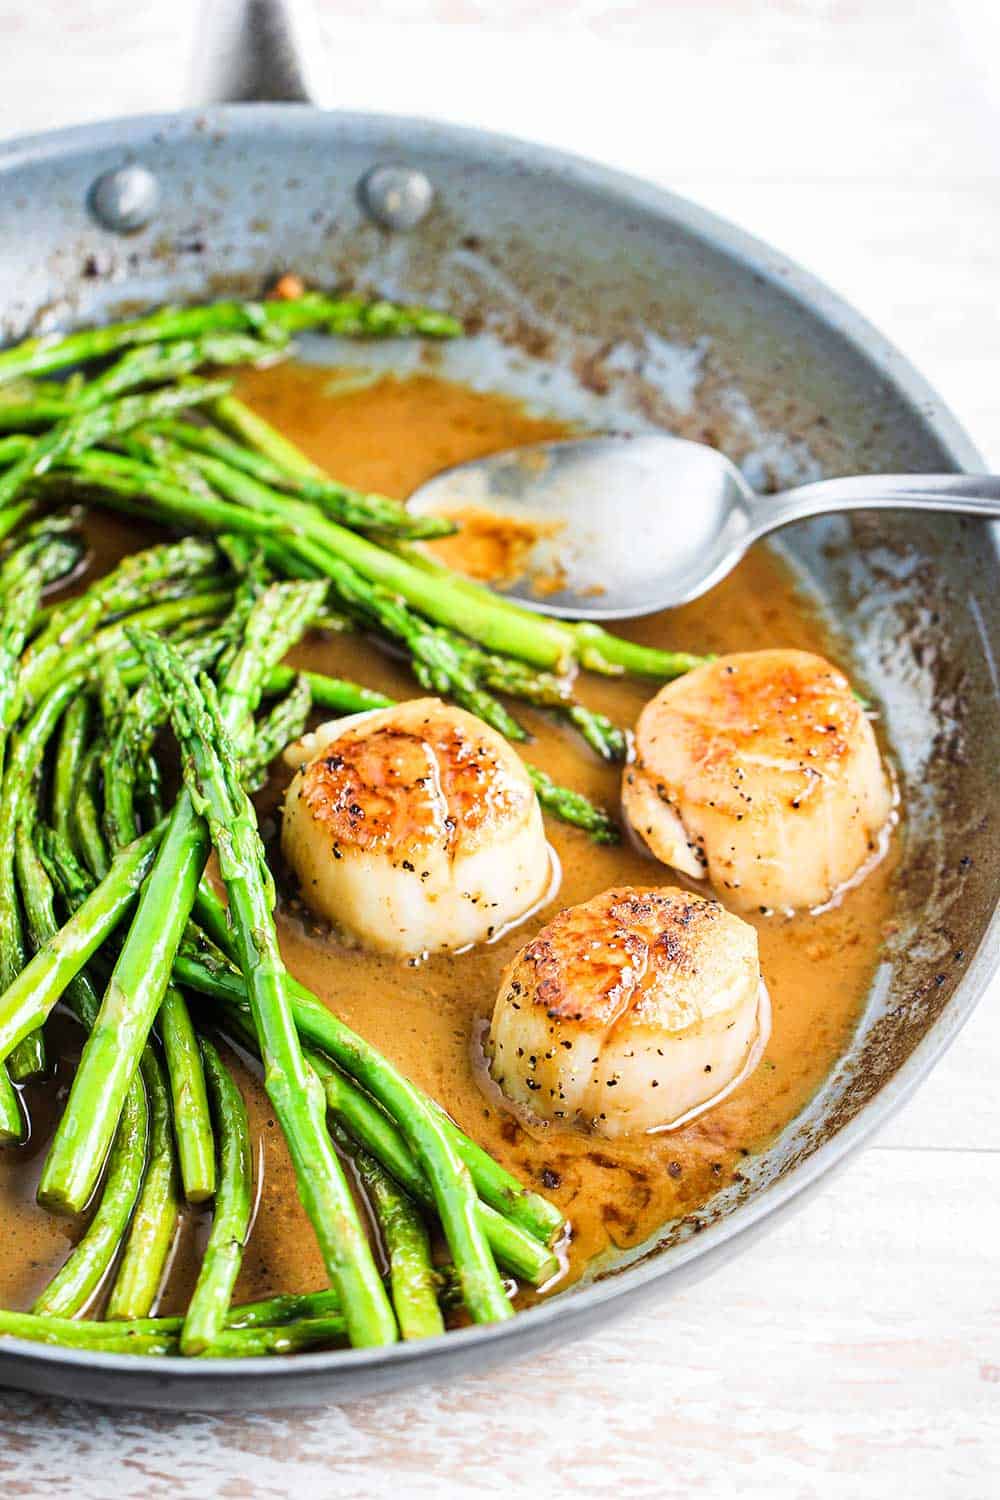 A skillet filled with 3 seared scallops with asparagus in a white wine brown sauce.